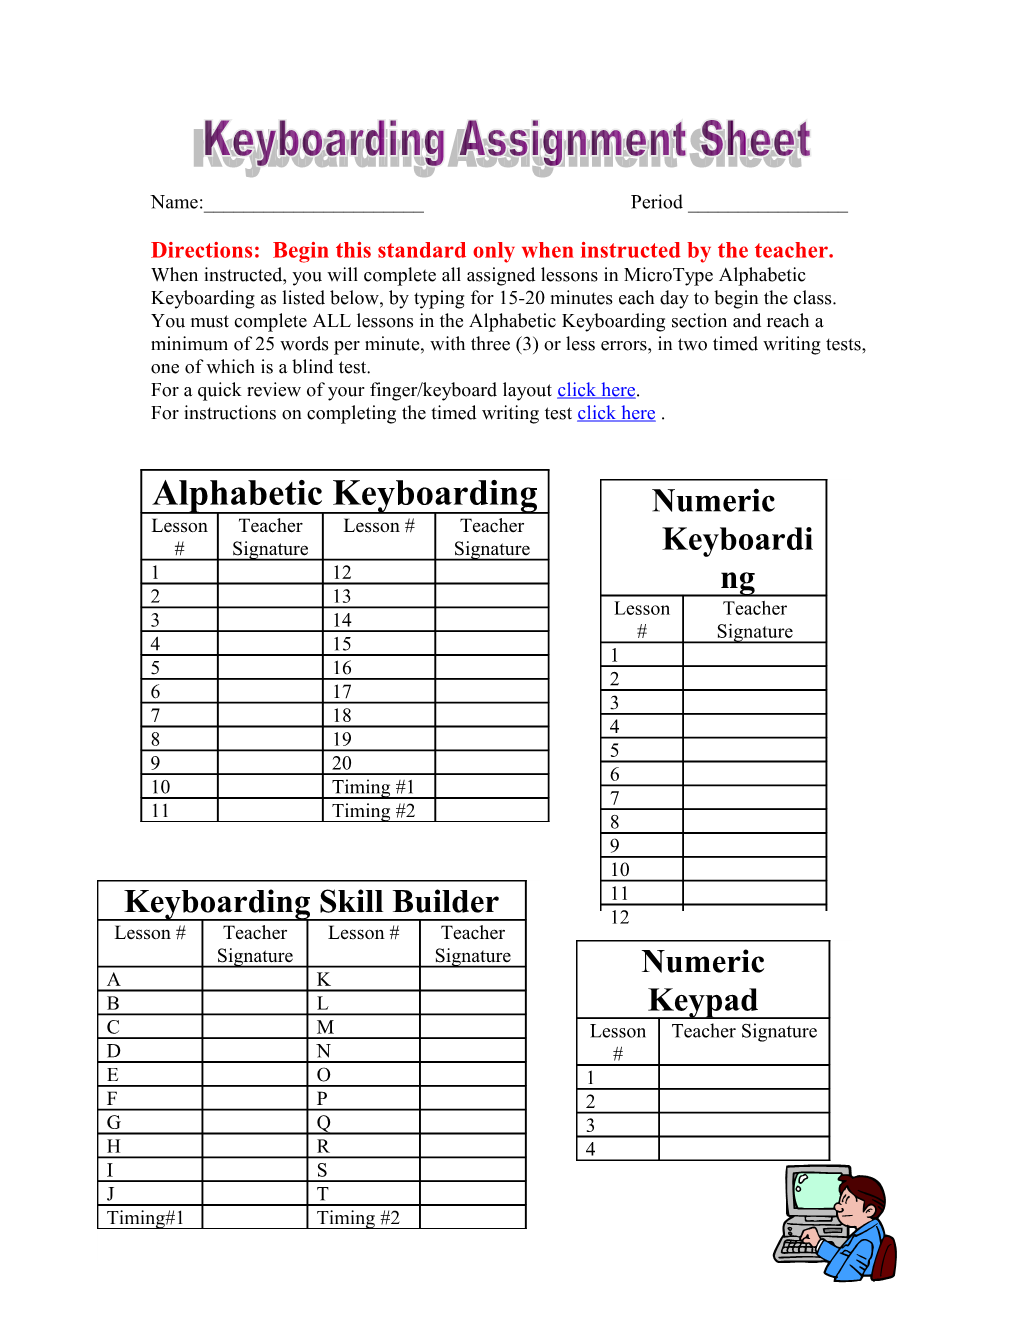 Microtype Pro Assignment Sheet